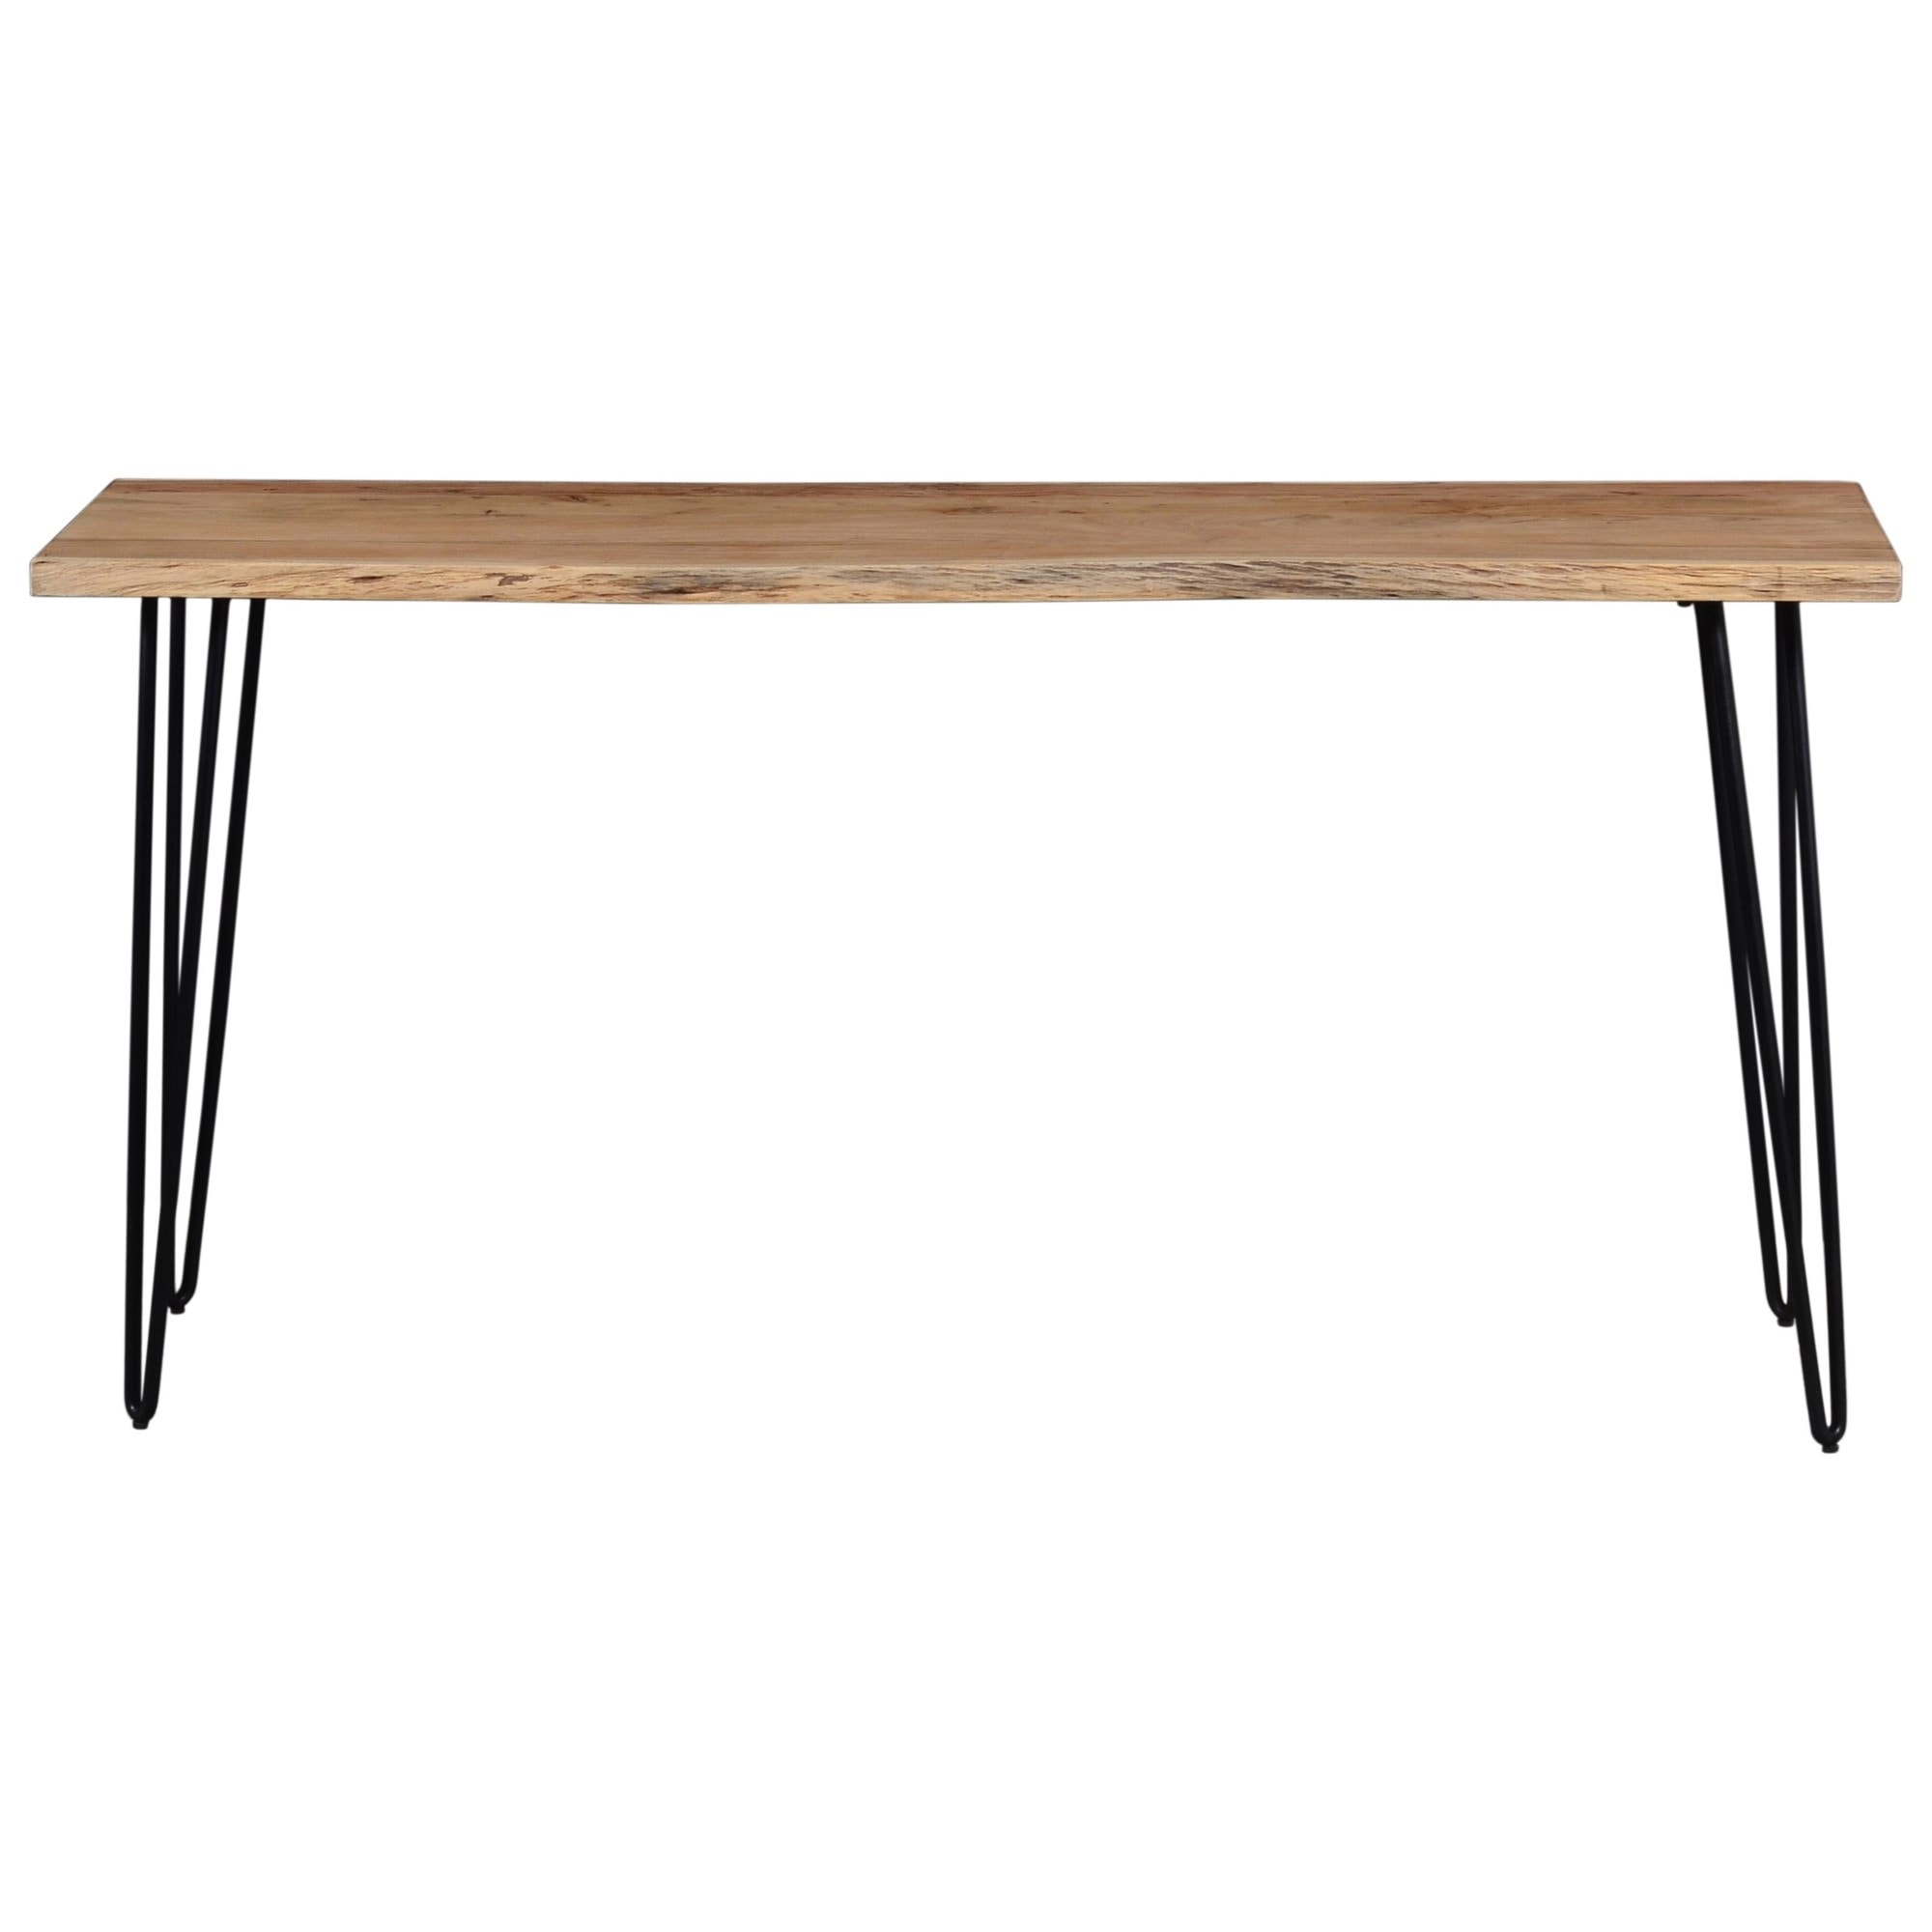 Wood Top Counter Height Table